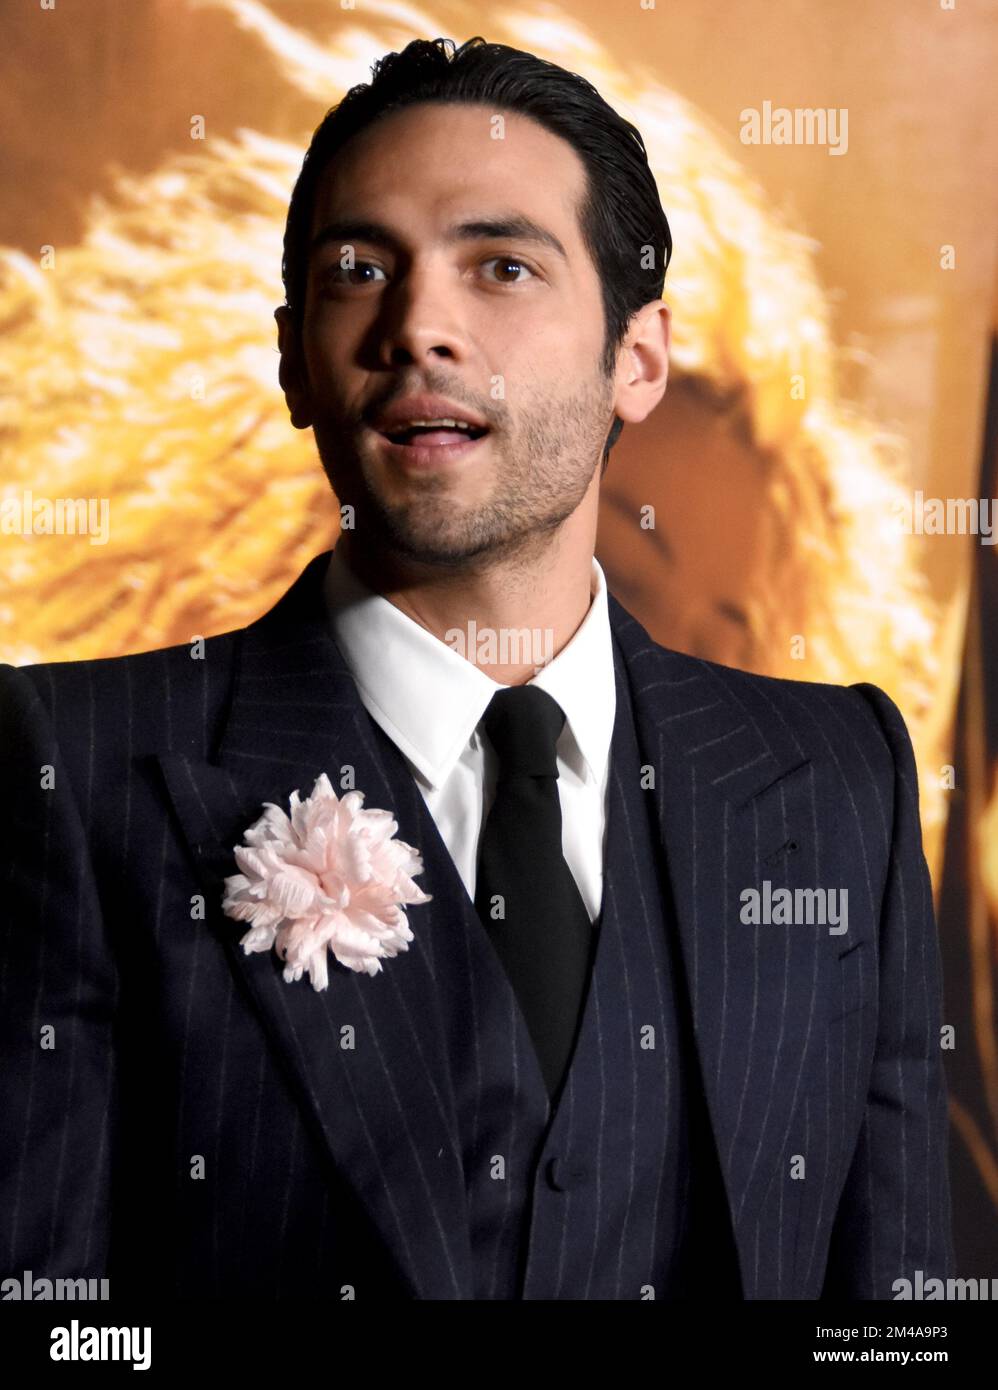 Los Angeles, California, USA 15th December 2022 Actor Diego Calva attends the Global Premiere Screening of 'Babylon' at Academy Museum of Motion Pictures on December 15, 2022 in Los Angeles, California, USA. Photo by Barry King/Alamy Stock Photo Stock Photo